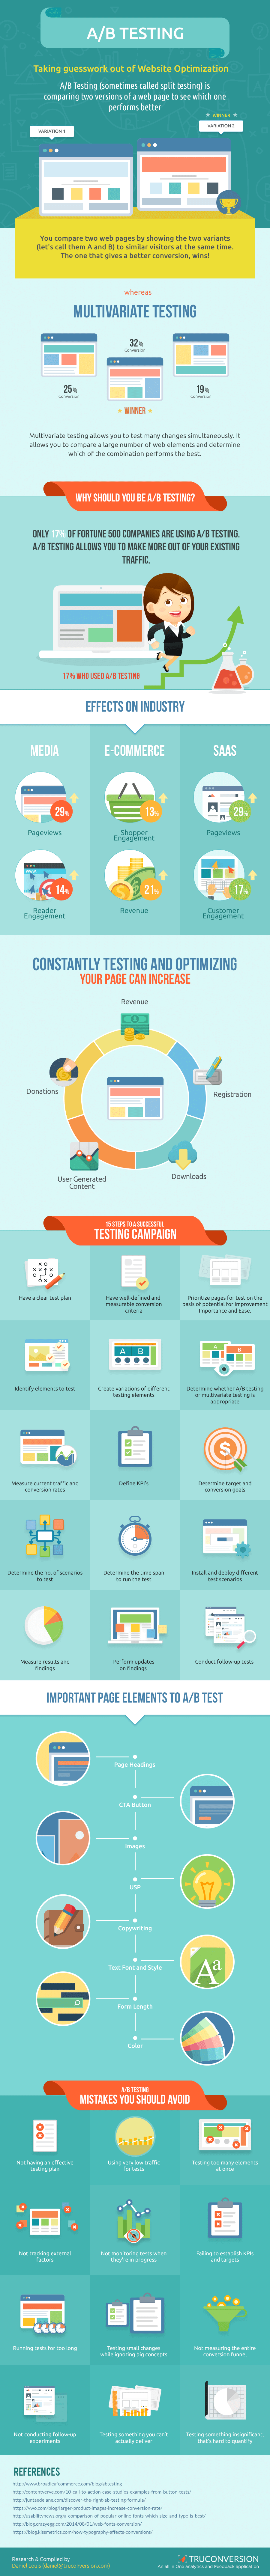 Step by Step Guide to A/B Testing